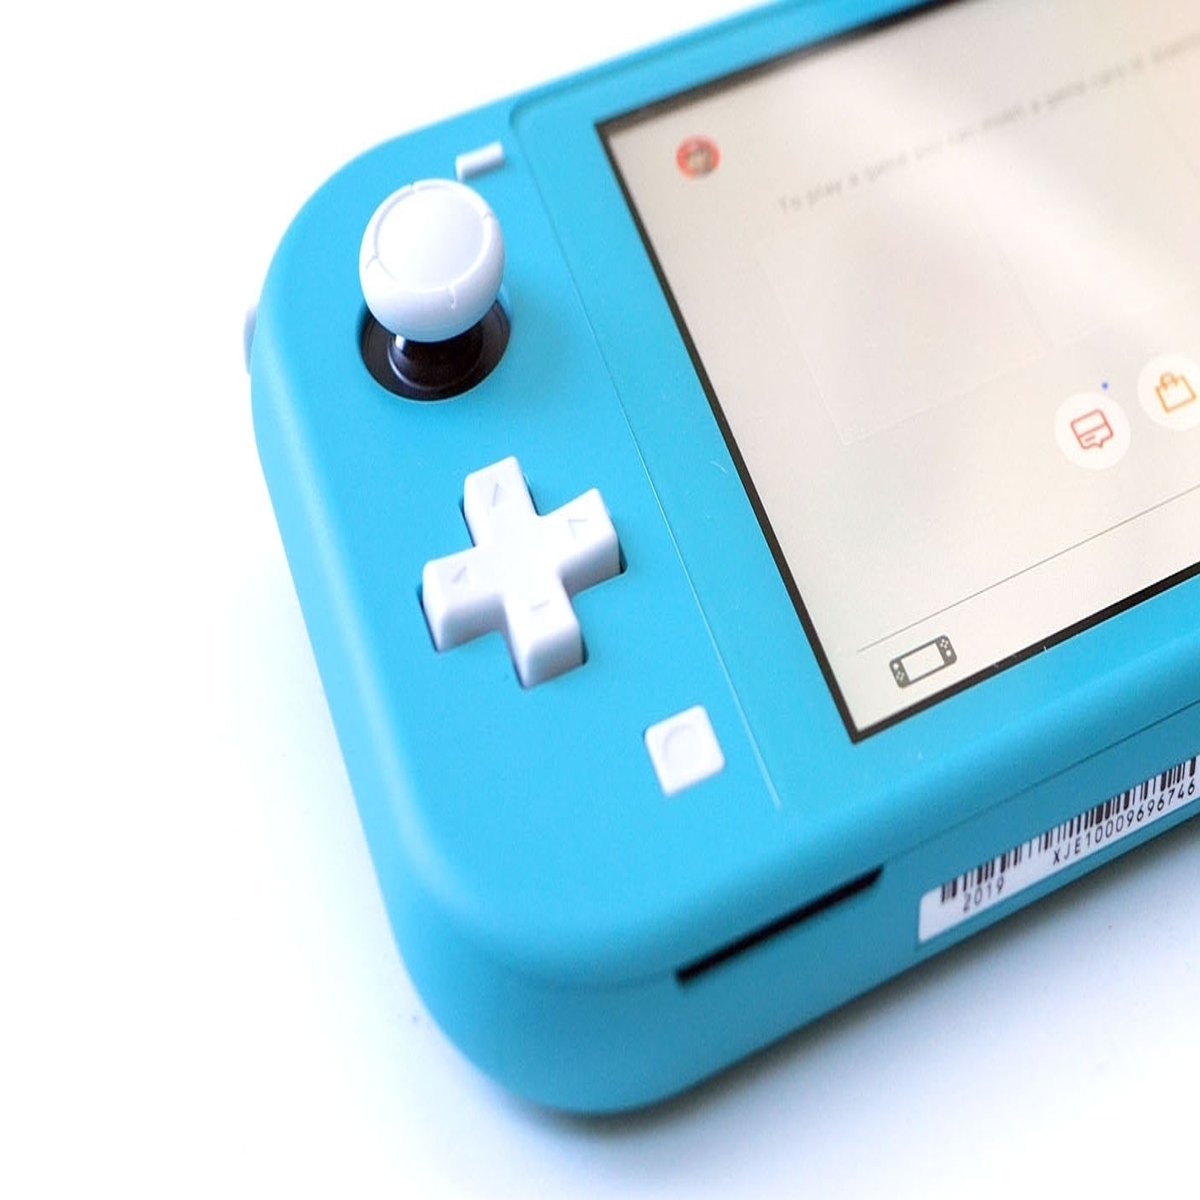 Nintendo Switch Lite review: Where to buy it and why I love it